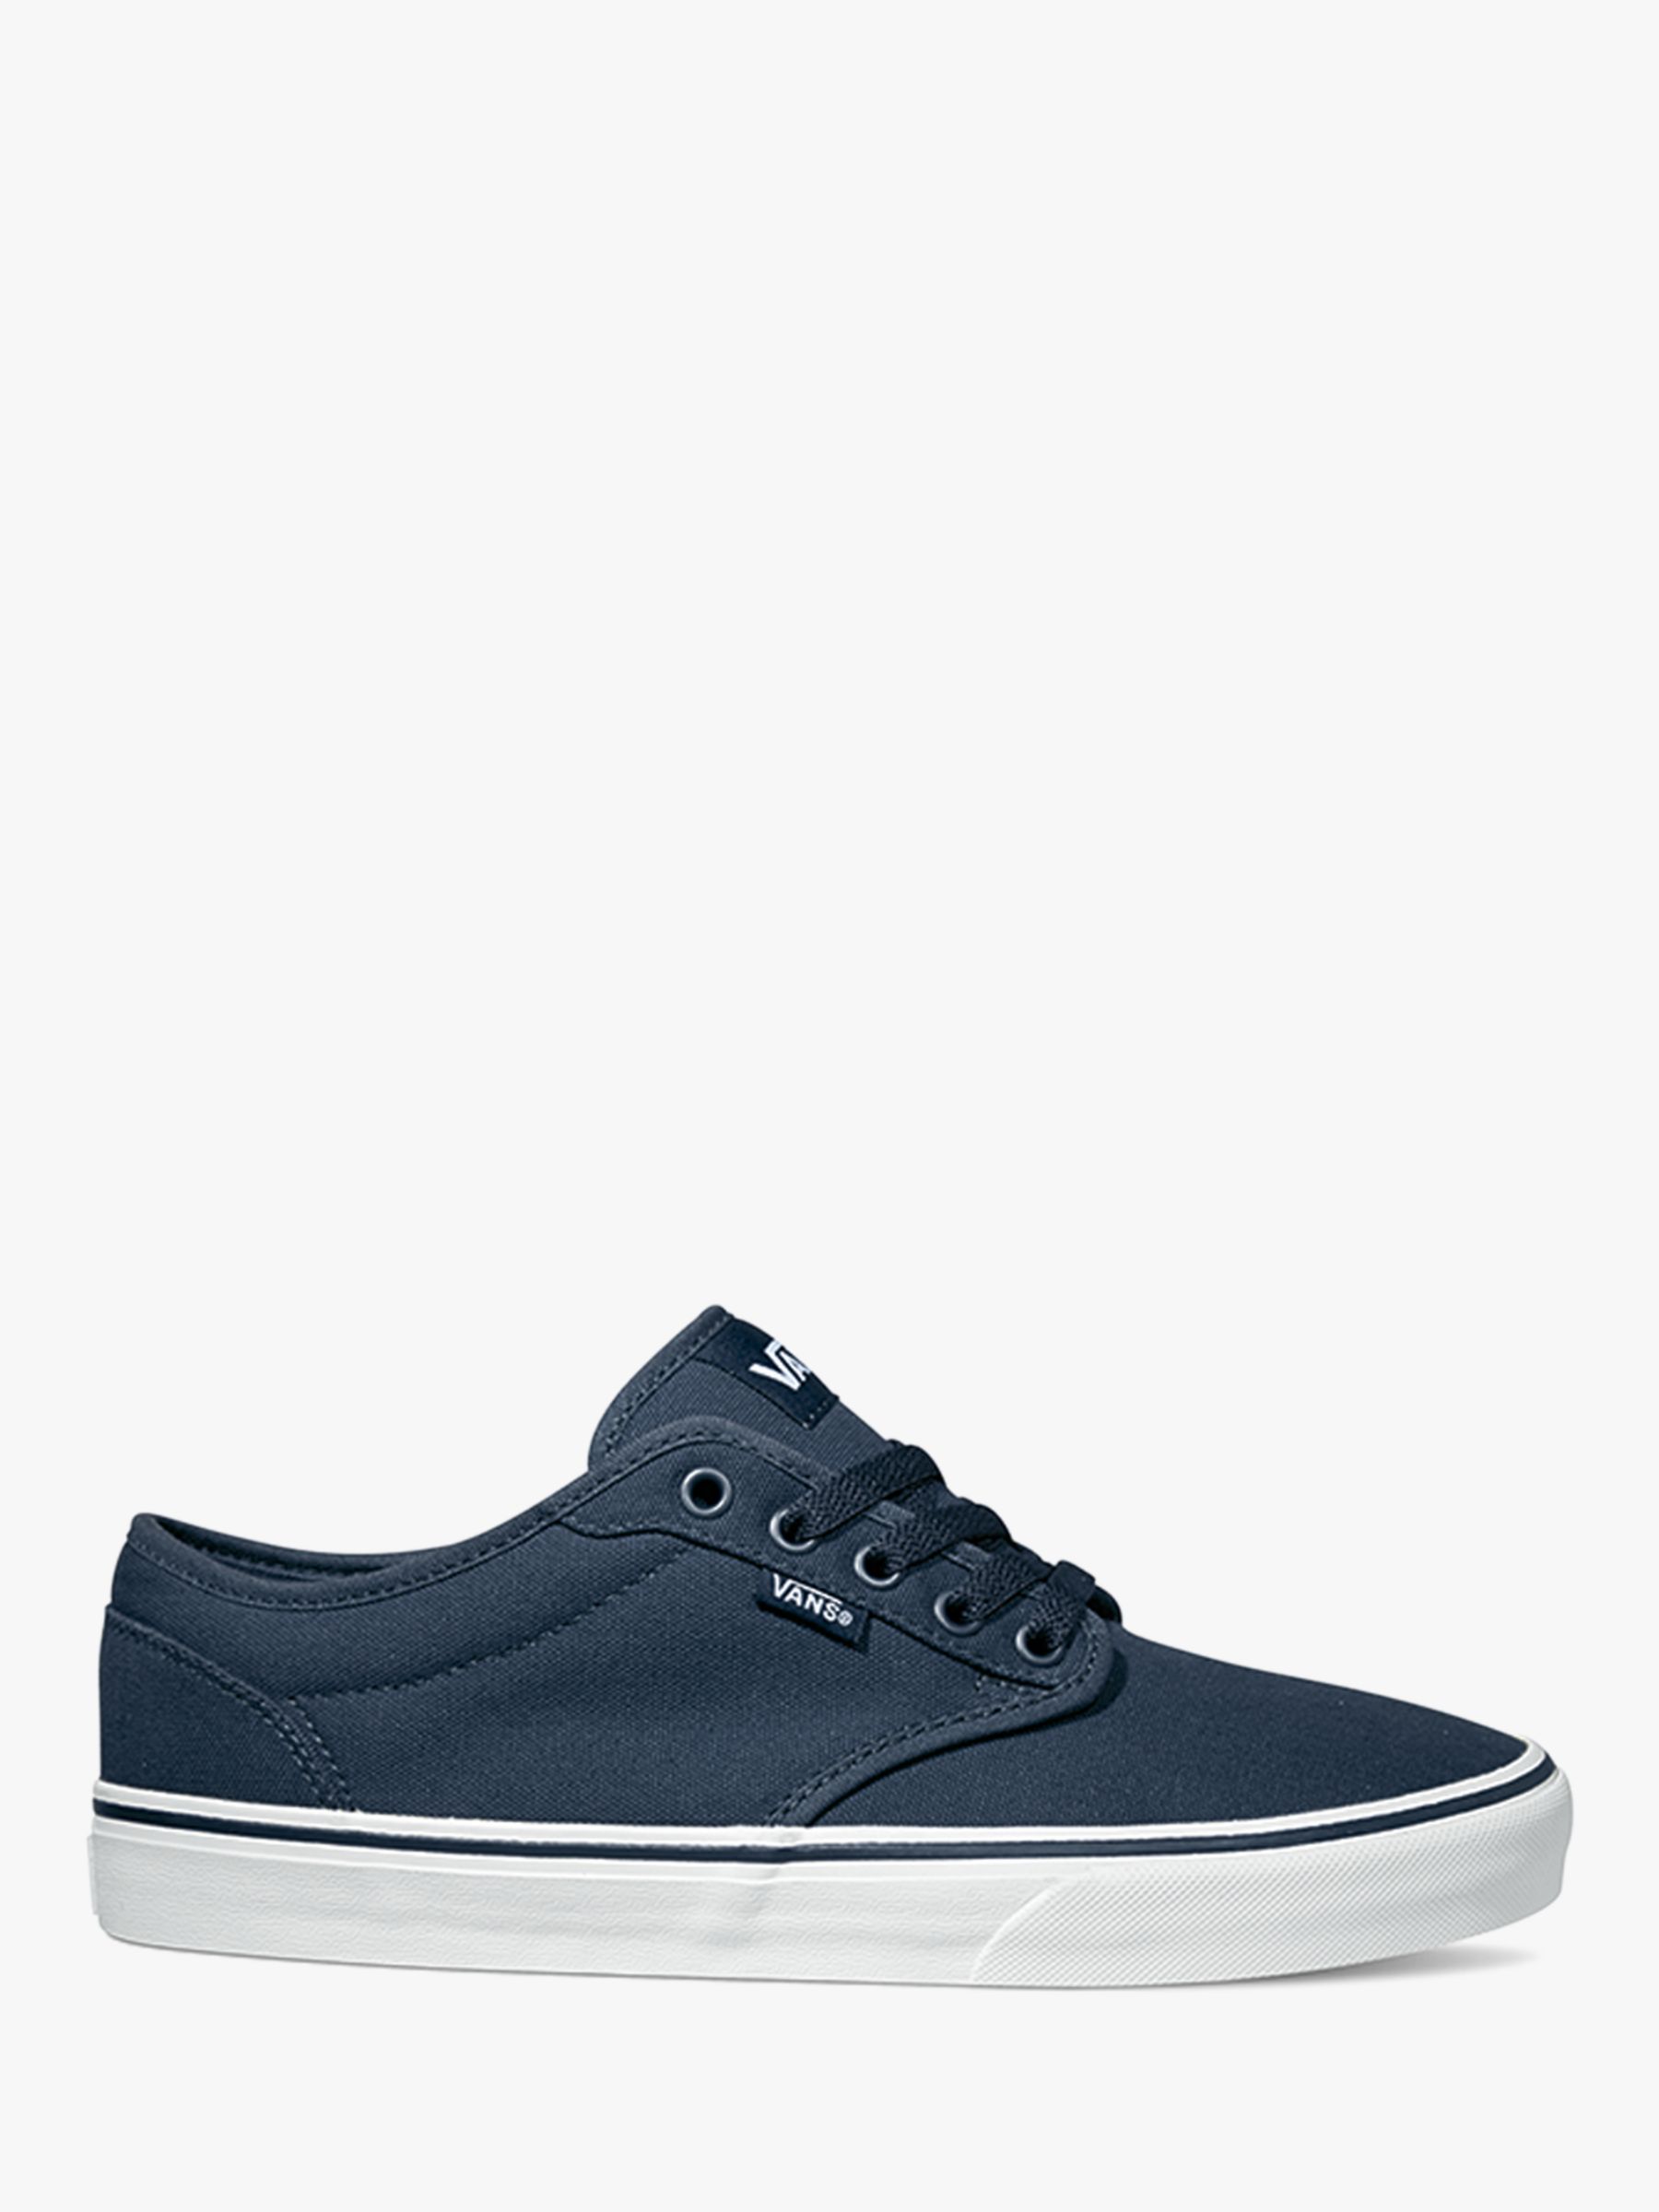 vans atwood canvas navy